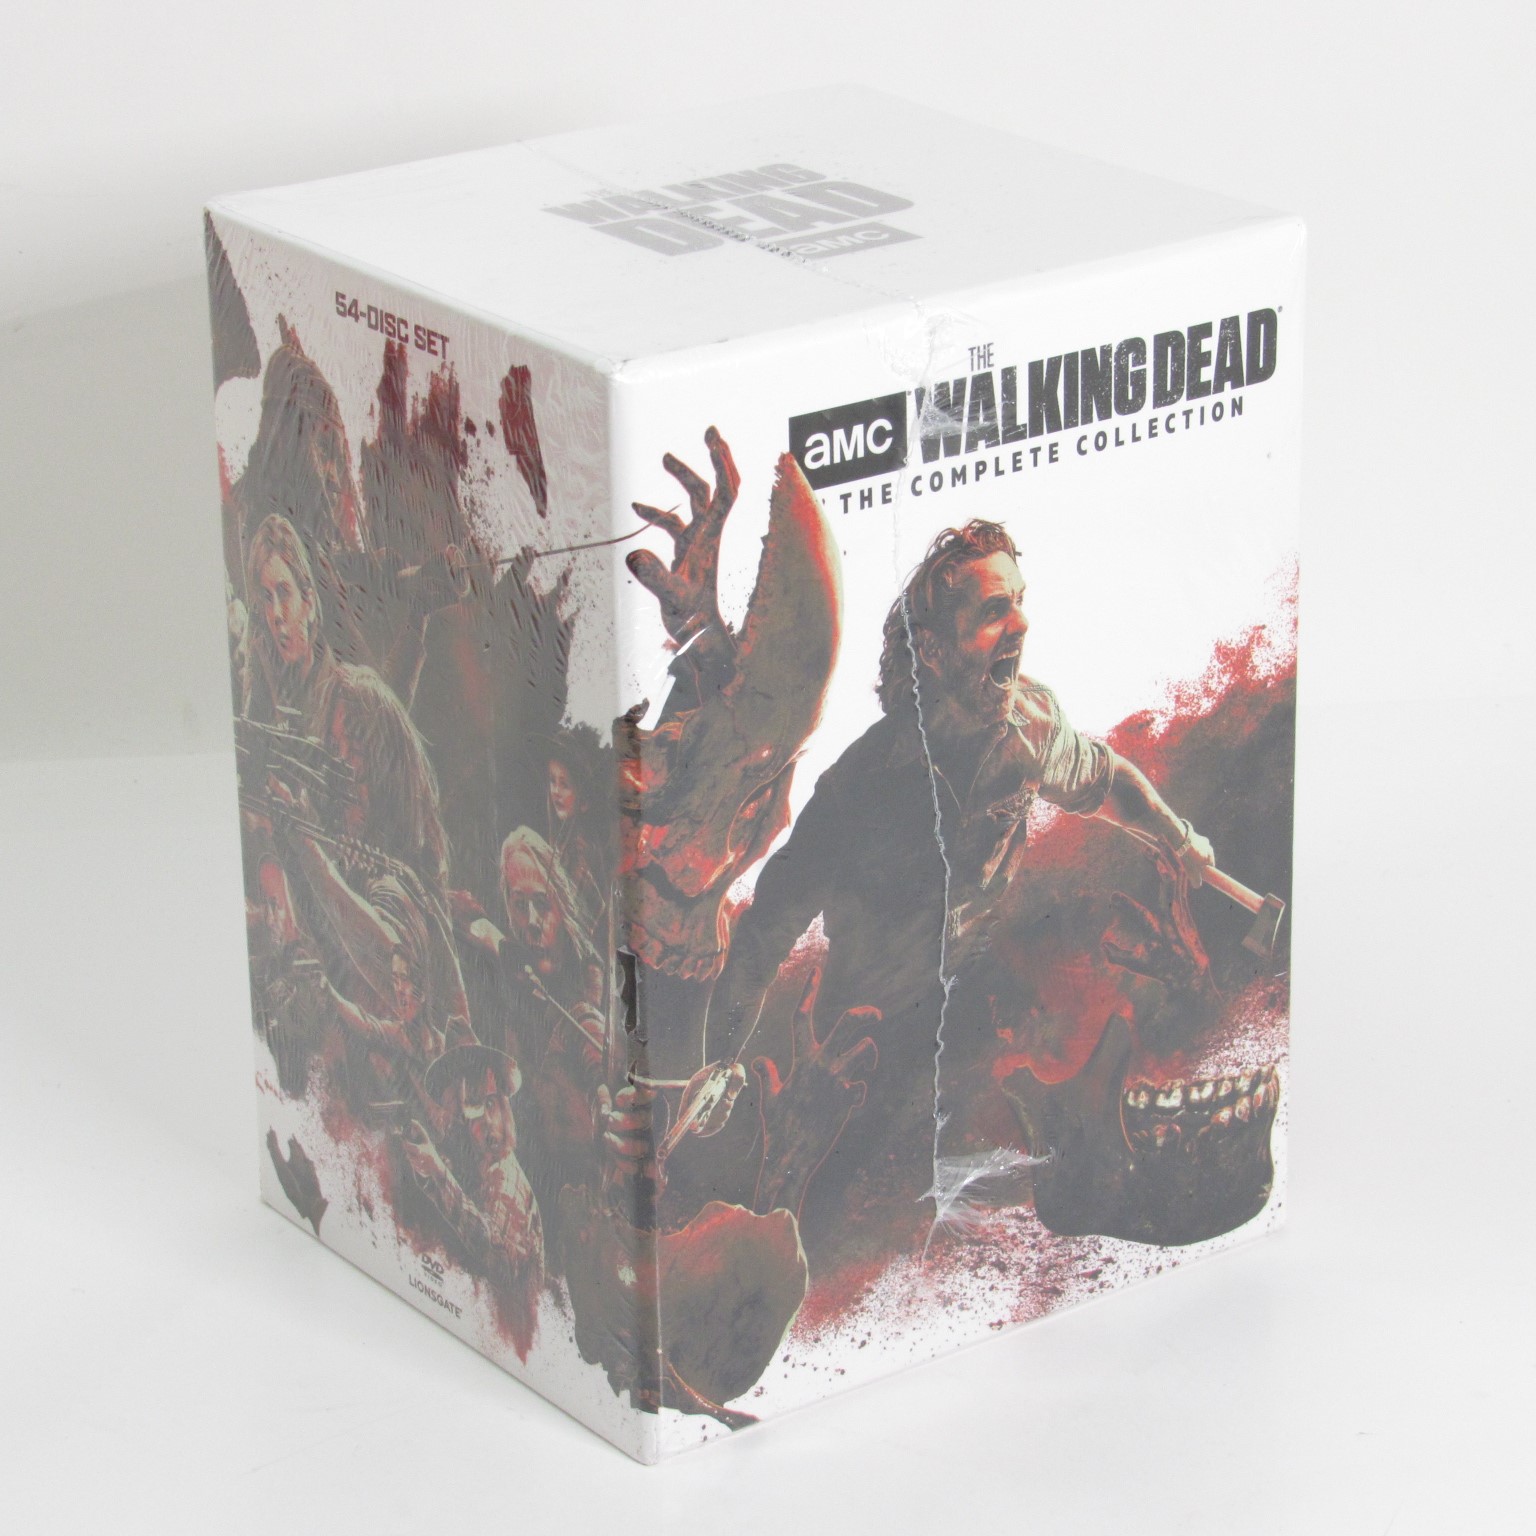 The Walking Dead Complete Series 54-Disc DVD Collection Set